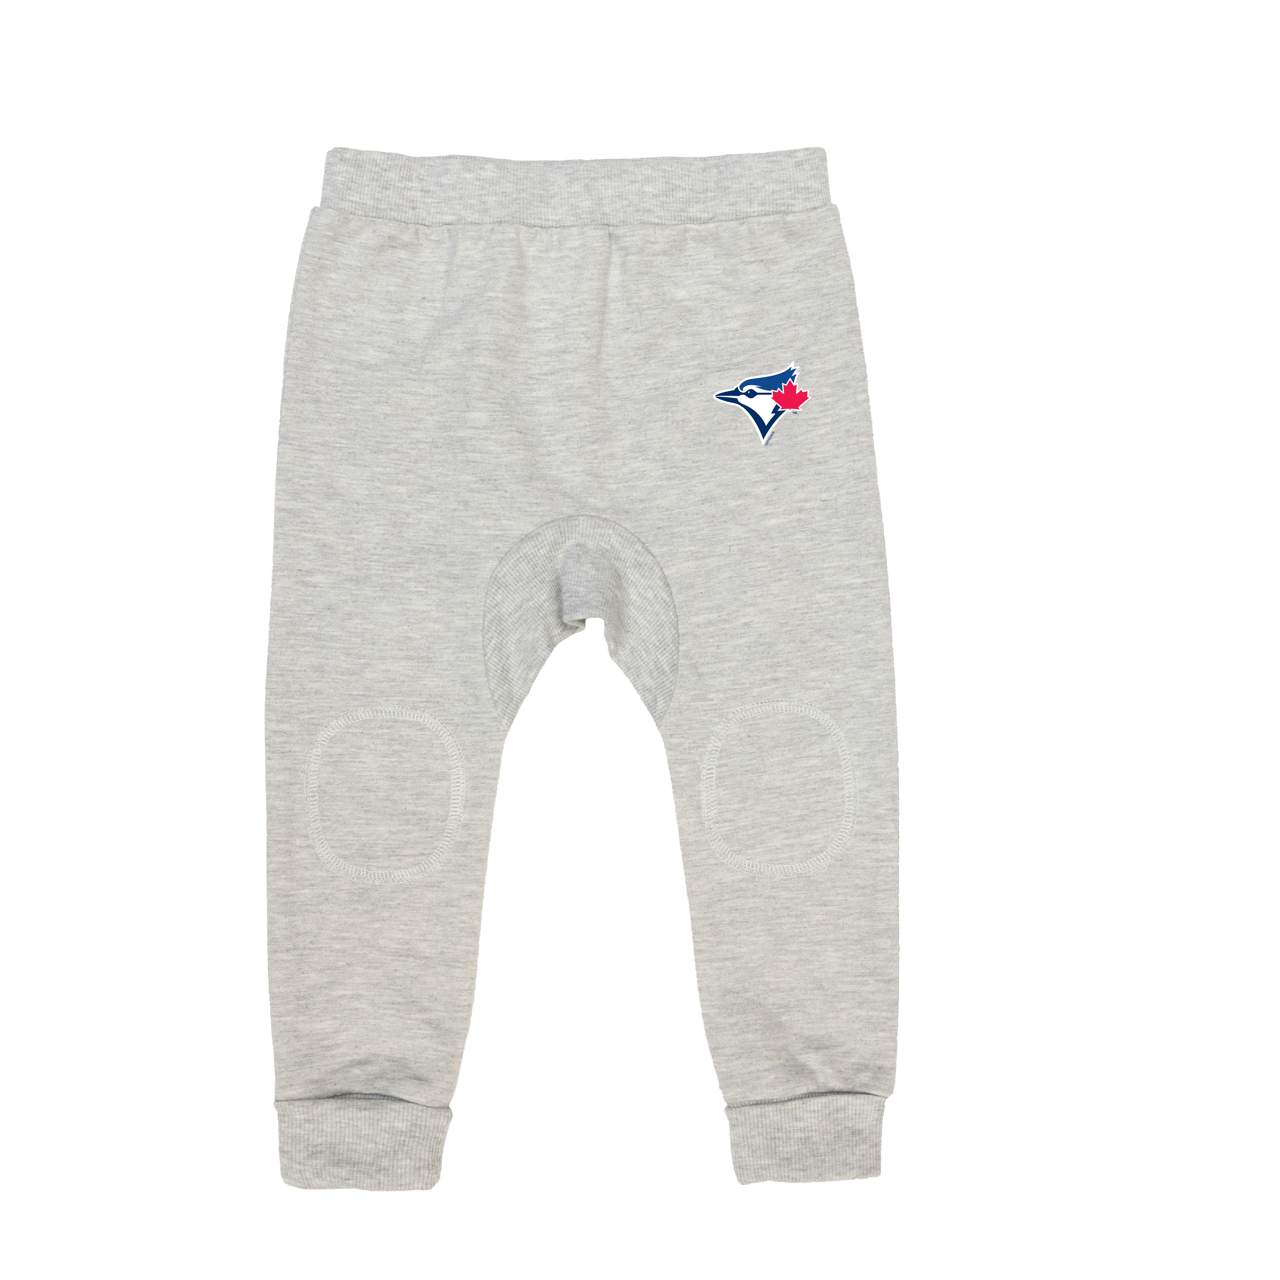 Gertex MLB Unisex Baby French Terry Cotton Track Pants